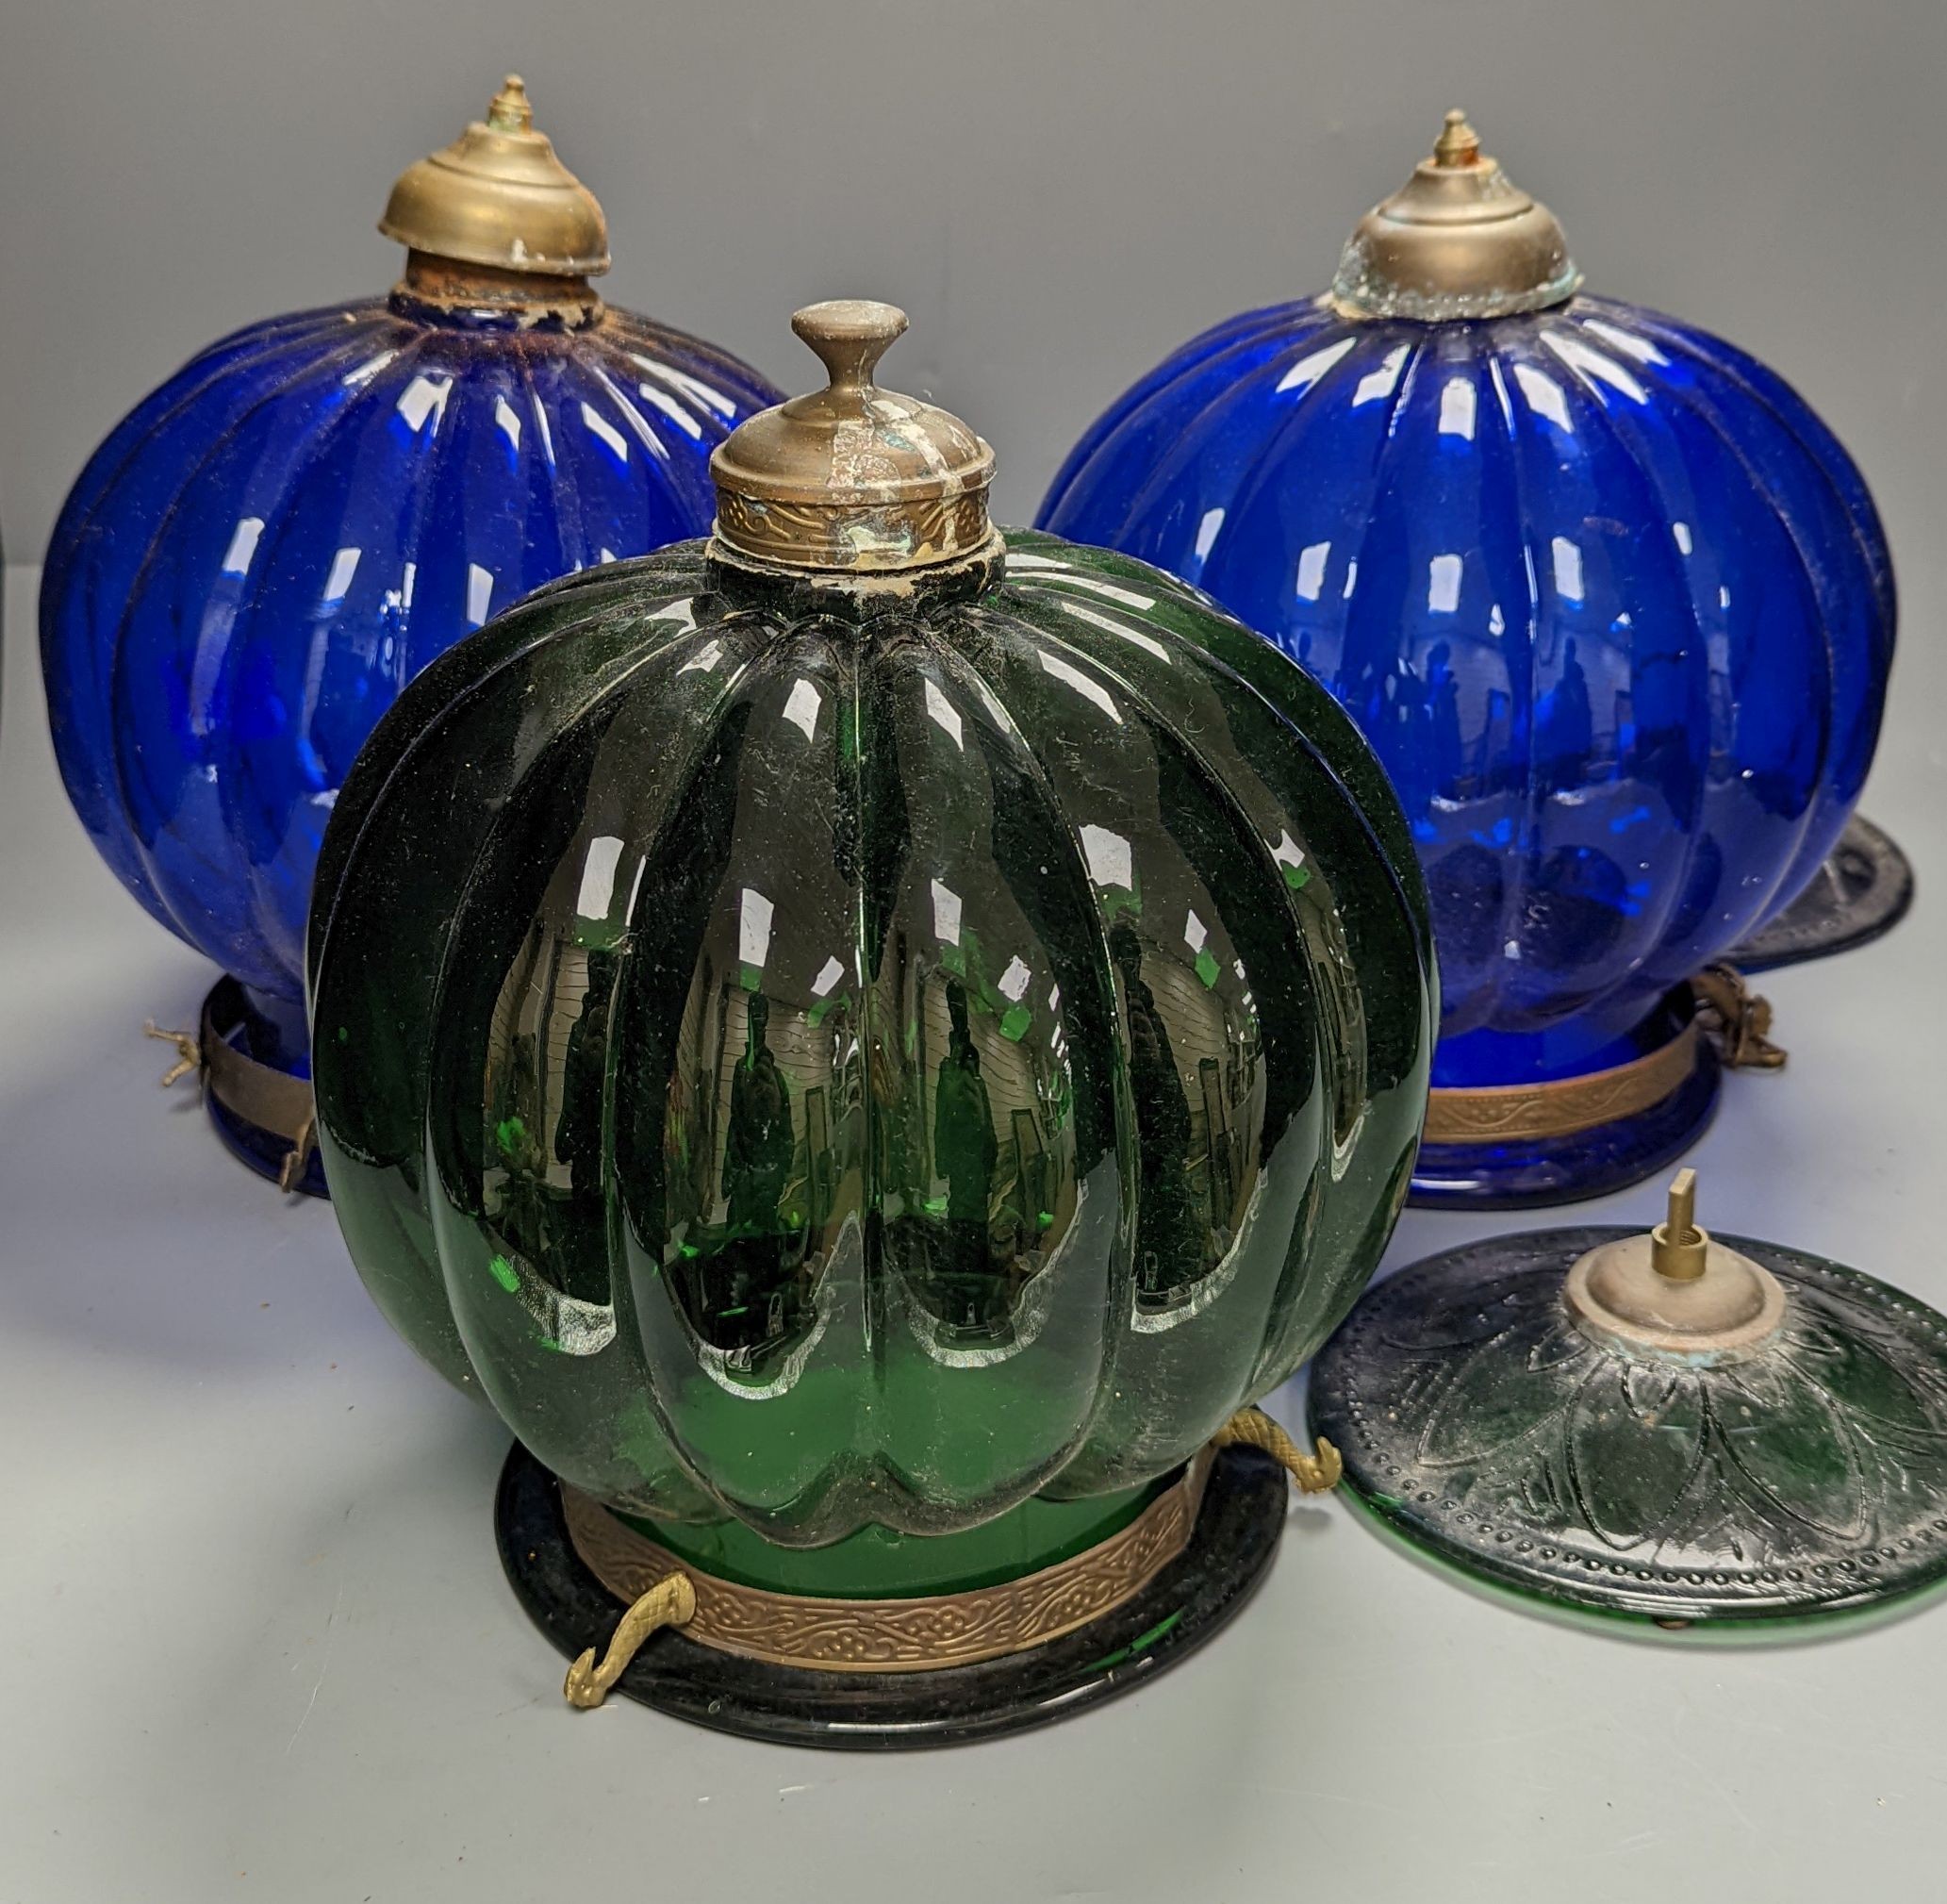 Three coloured glass pendant fluted globe shaped lamps - two blue, one green, 30 cms high.